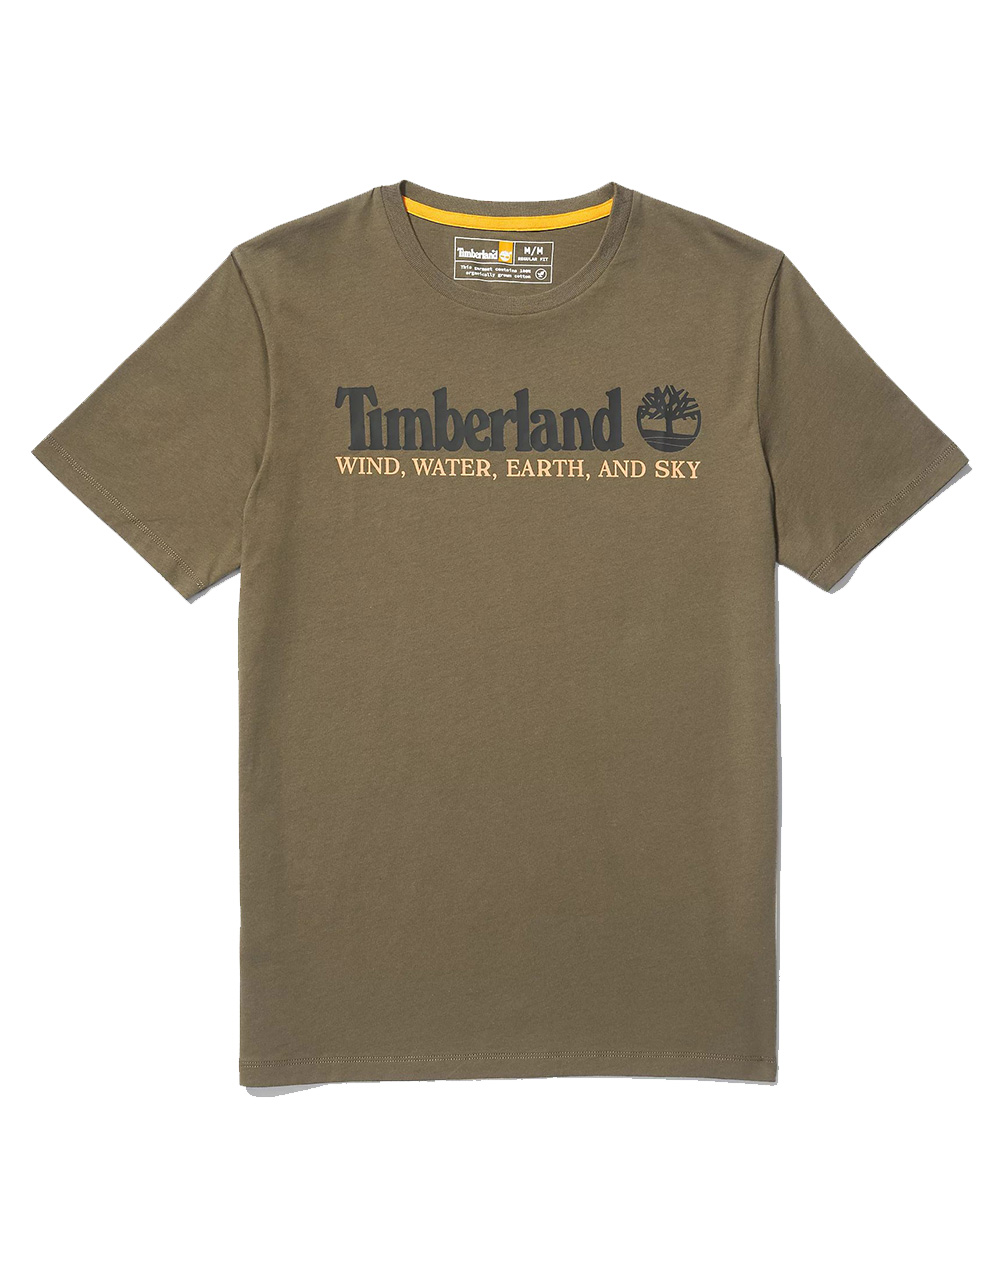 TIMBERLAND WWES Front Tee (Reg)